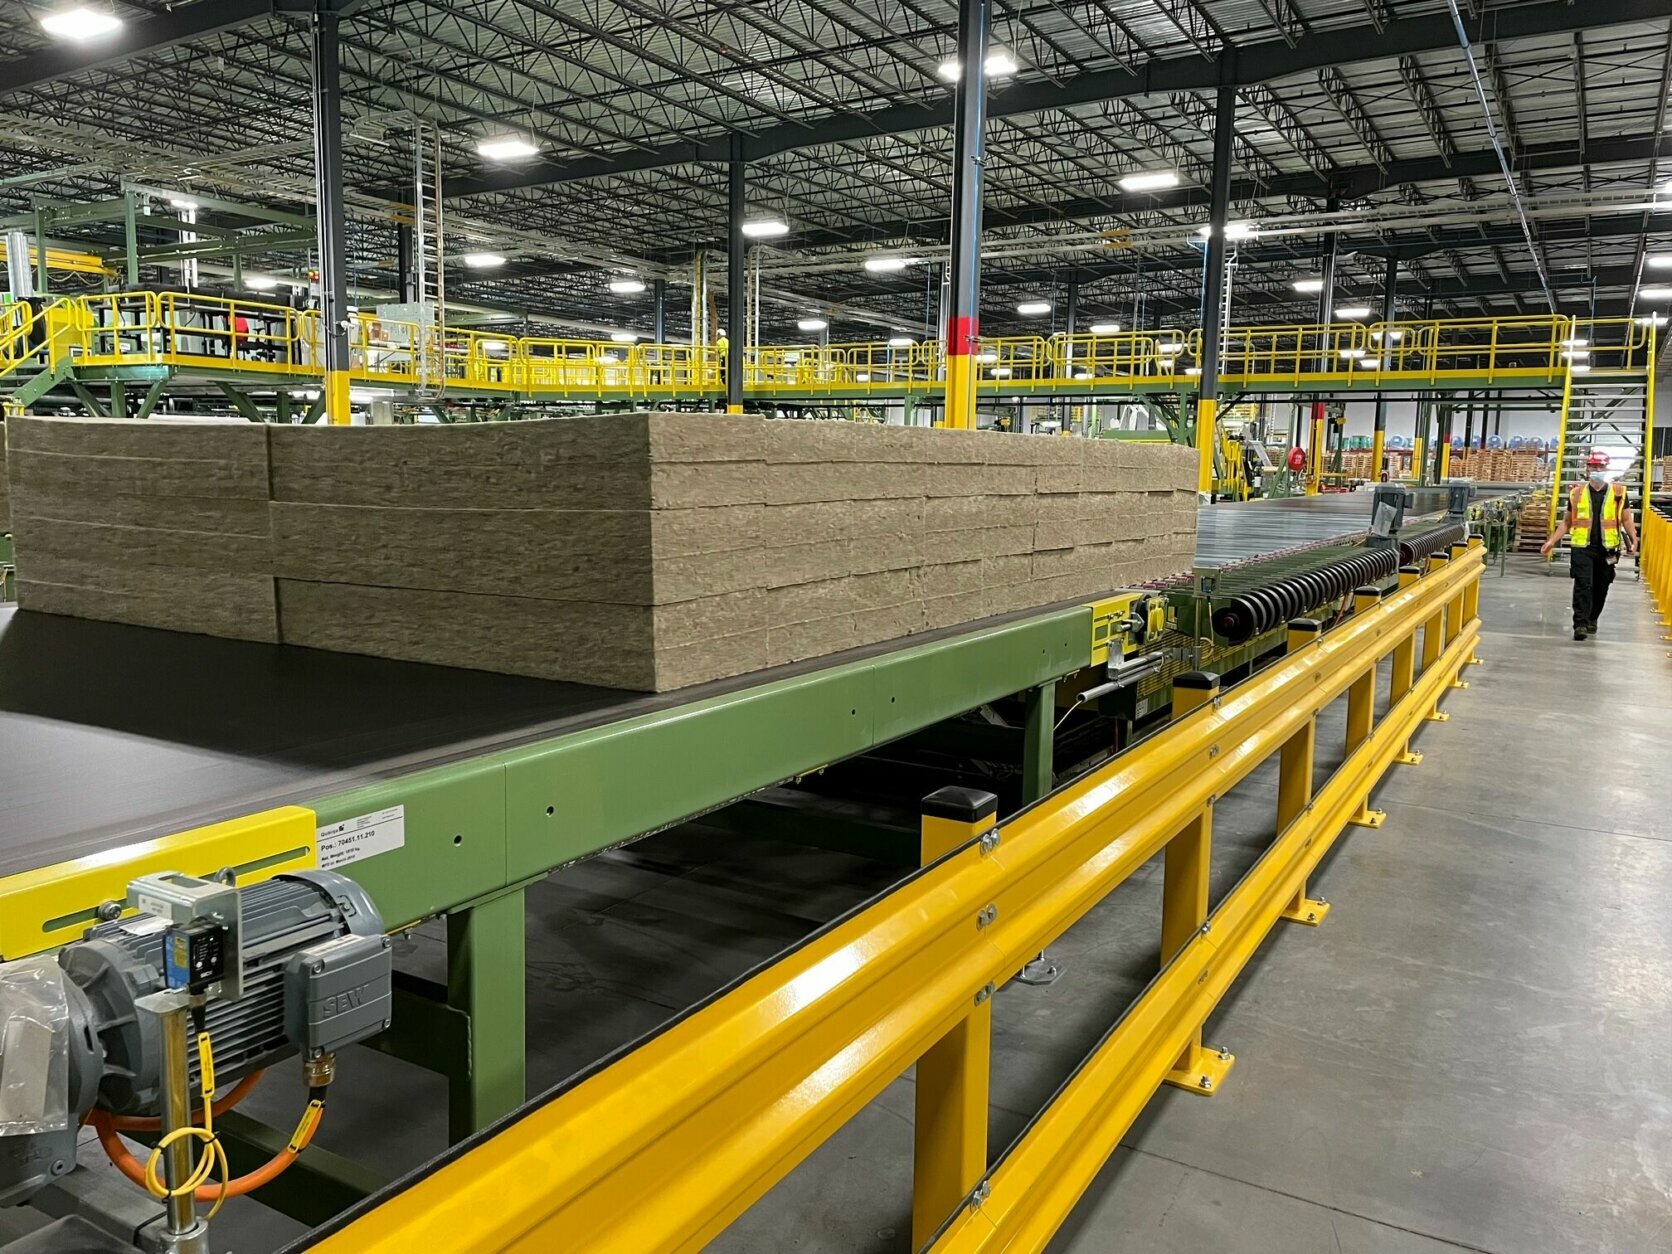 <p>Large conveyor belts transport the stone wool through the factory, where machines cut them into specific sizes and products.</p>
<p>The Ranson facility is Rockwool&#8217;s second U.S. factory; the other is in Byhalia, Mississippi.</p>
<p>&nbsp;</p>
